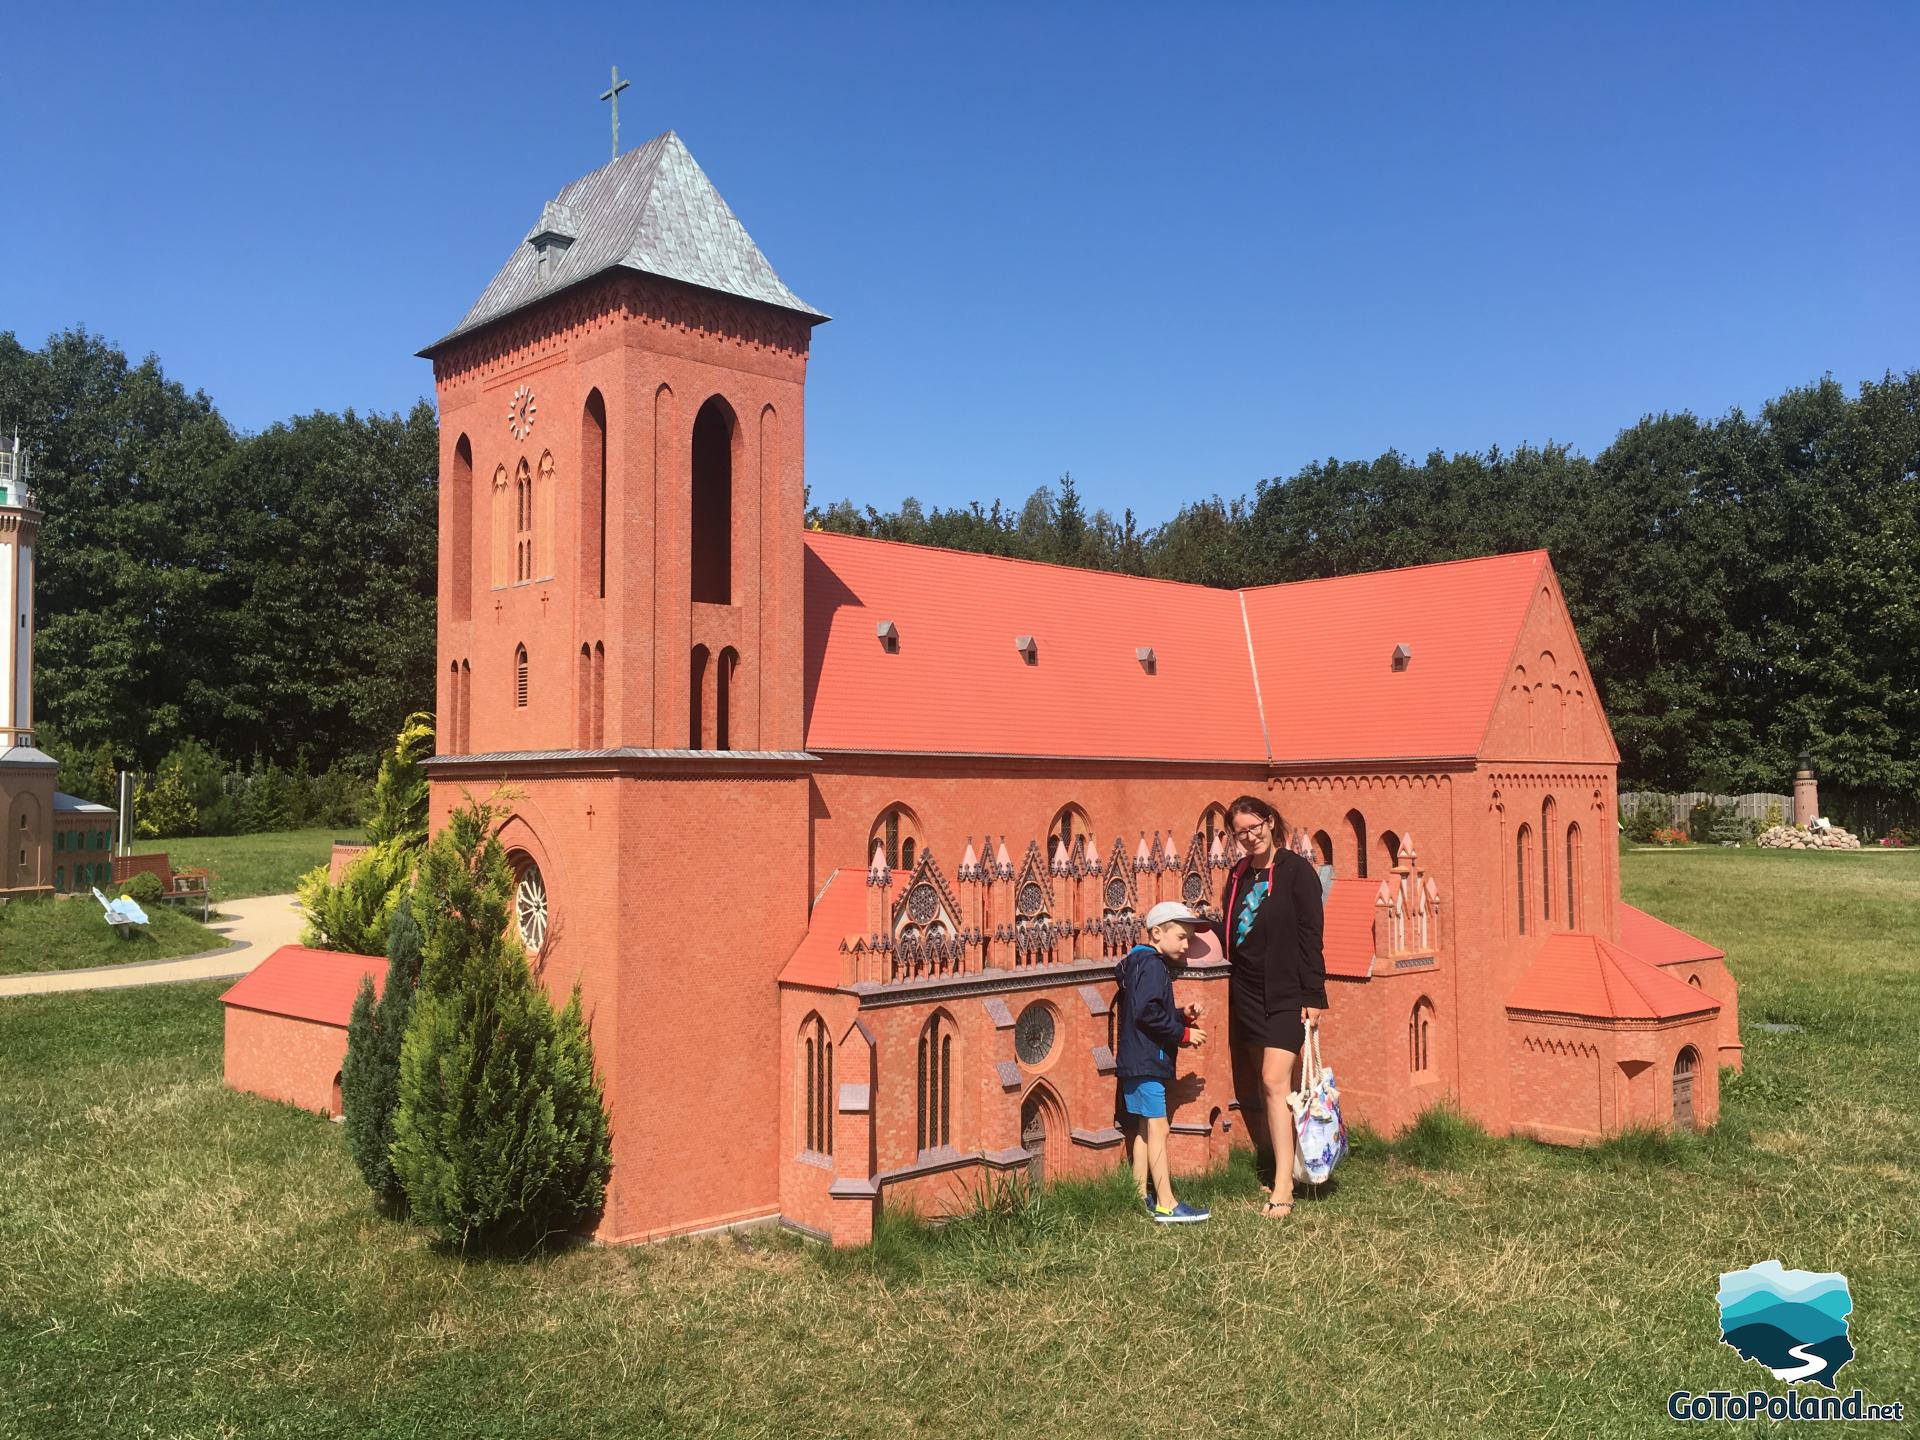 a boy and a woman standing by the church in the miniature park